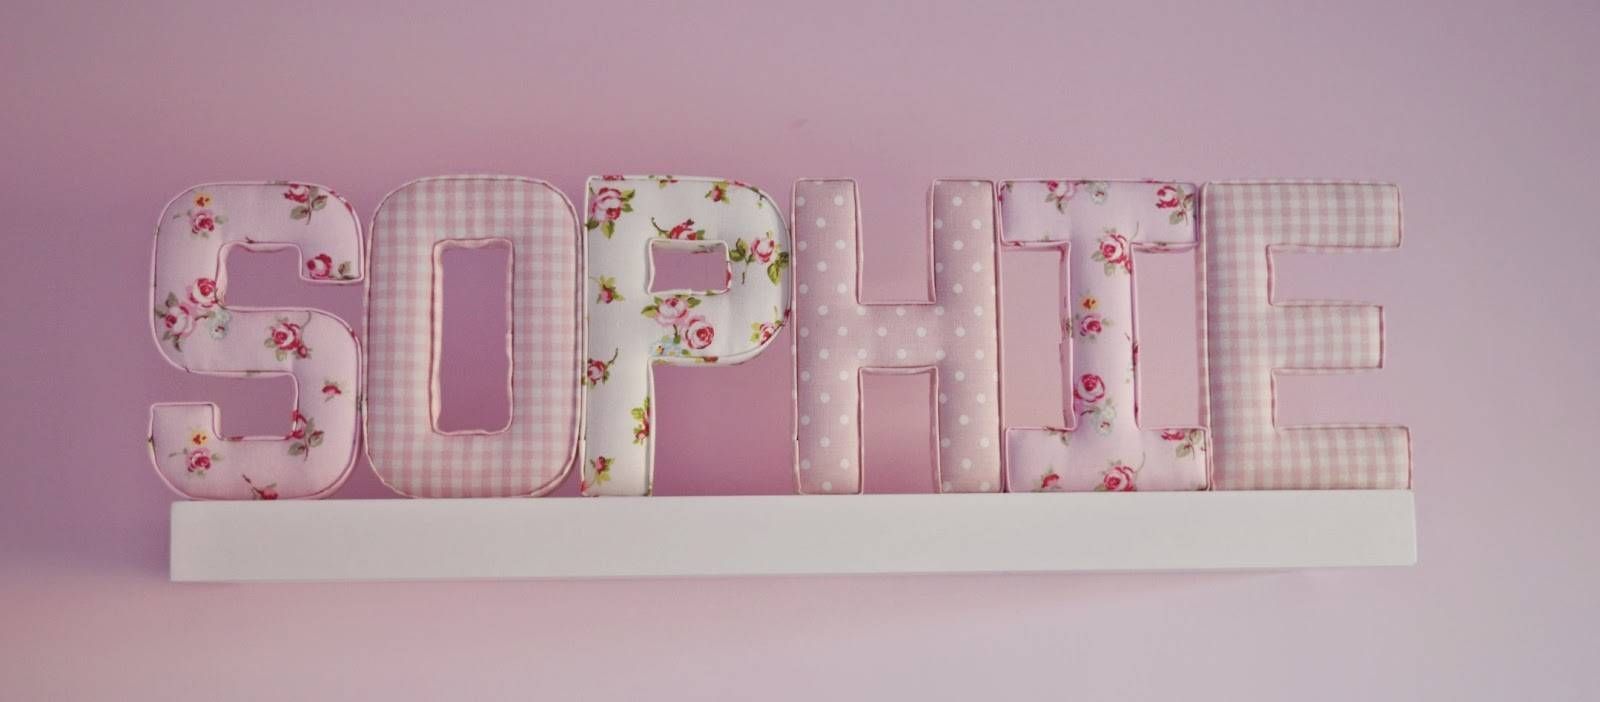 Bedroom. Cute Baby Room Name Letters Ideas As Bedroom Decorations With Latest Baby Name Wall Art (Gallery 20 of 25)